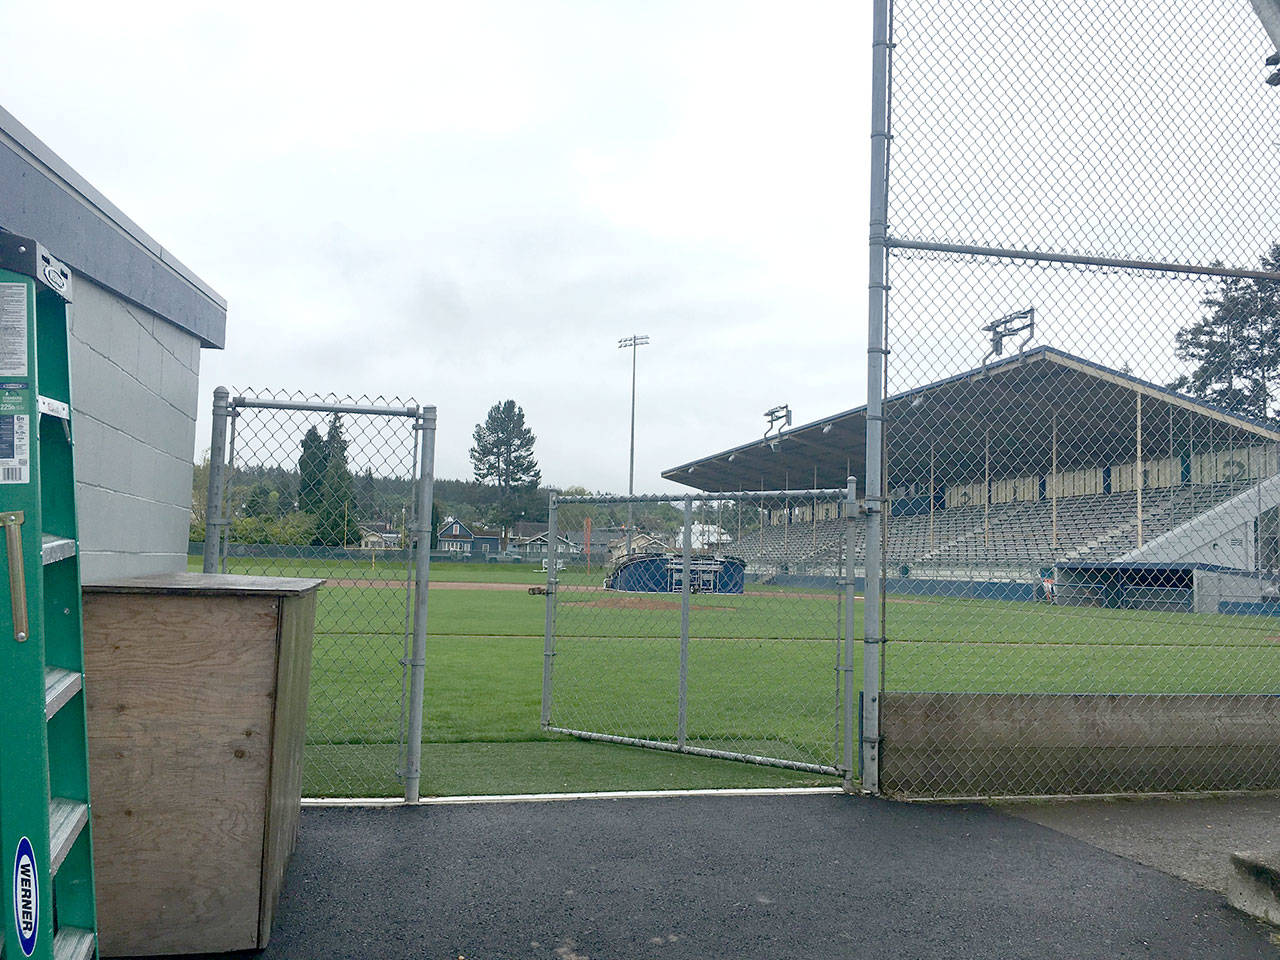 Civic Field is shown Monday. The Port Angeles City Council today will consider renewing a facility use agreement that would allow the Port Angeles Lefties to use the field for the next five years. (Rob Ollikainen/Peninsula Daily News)